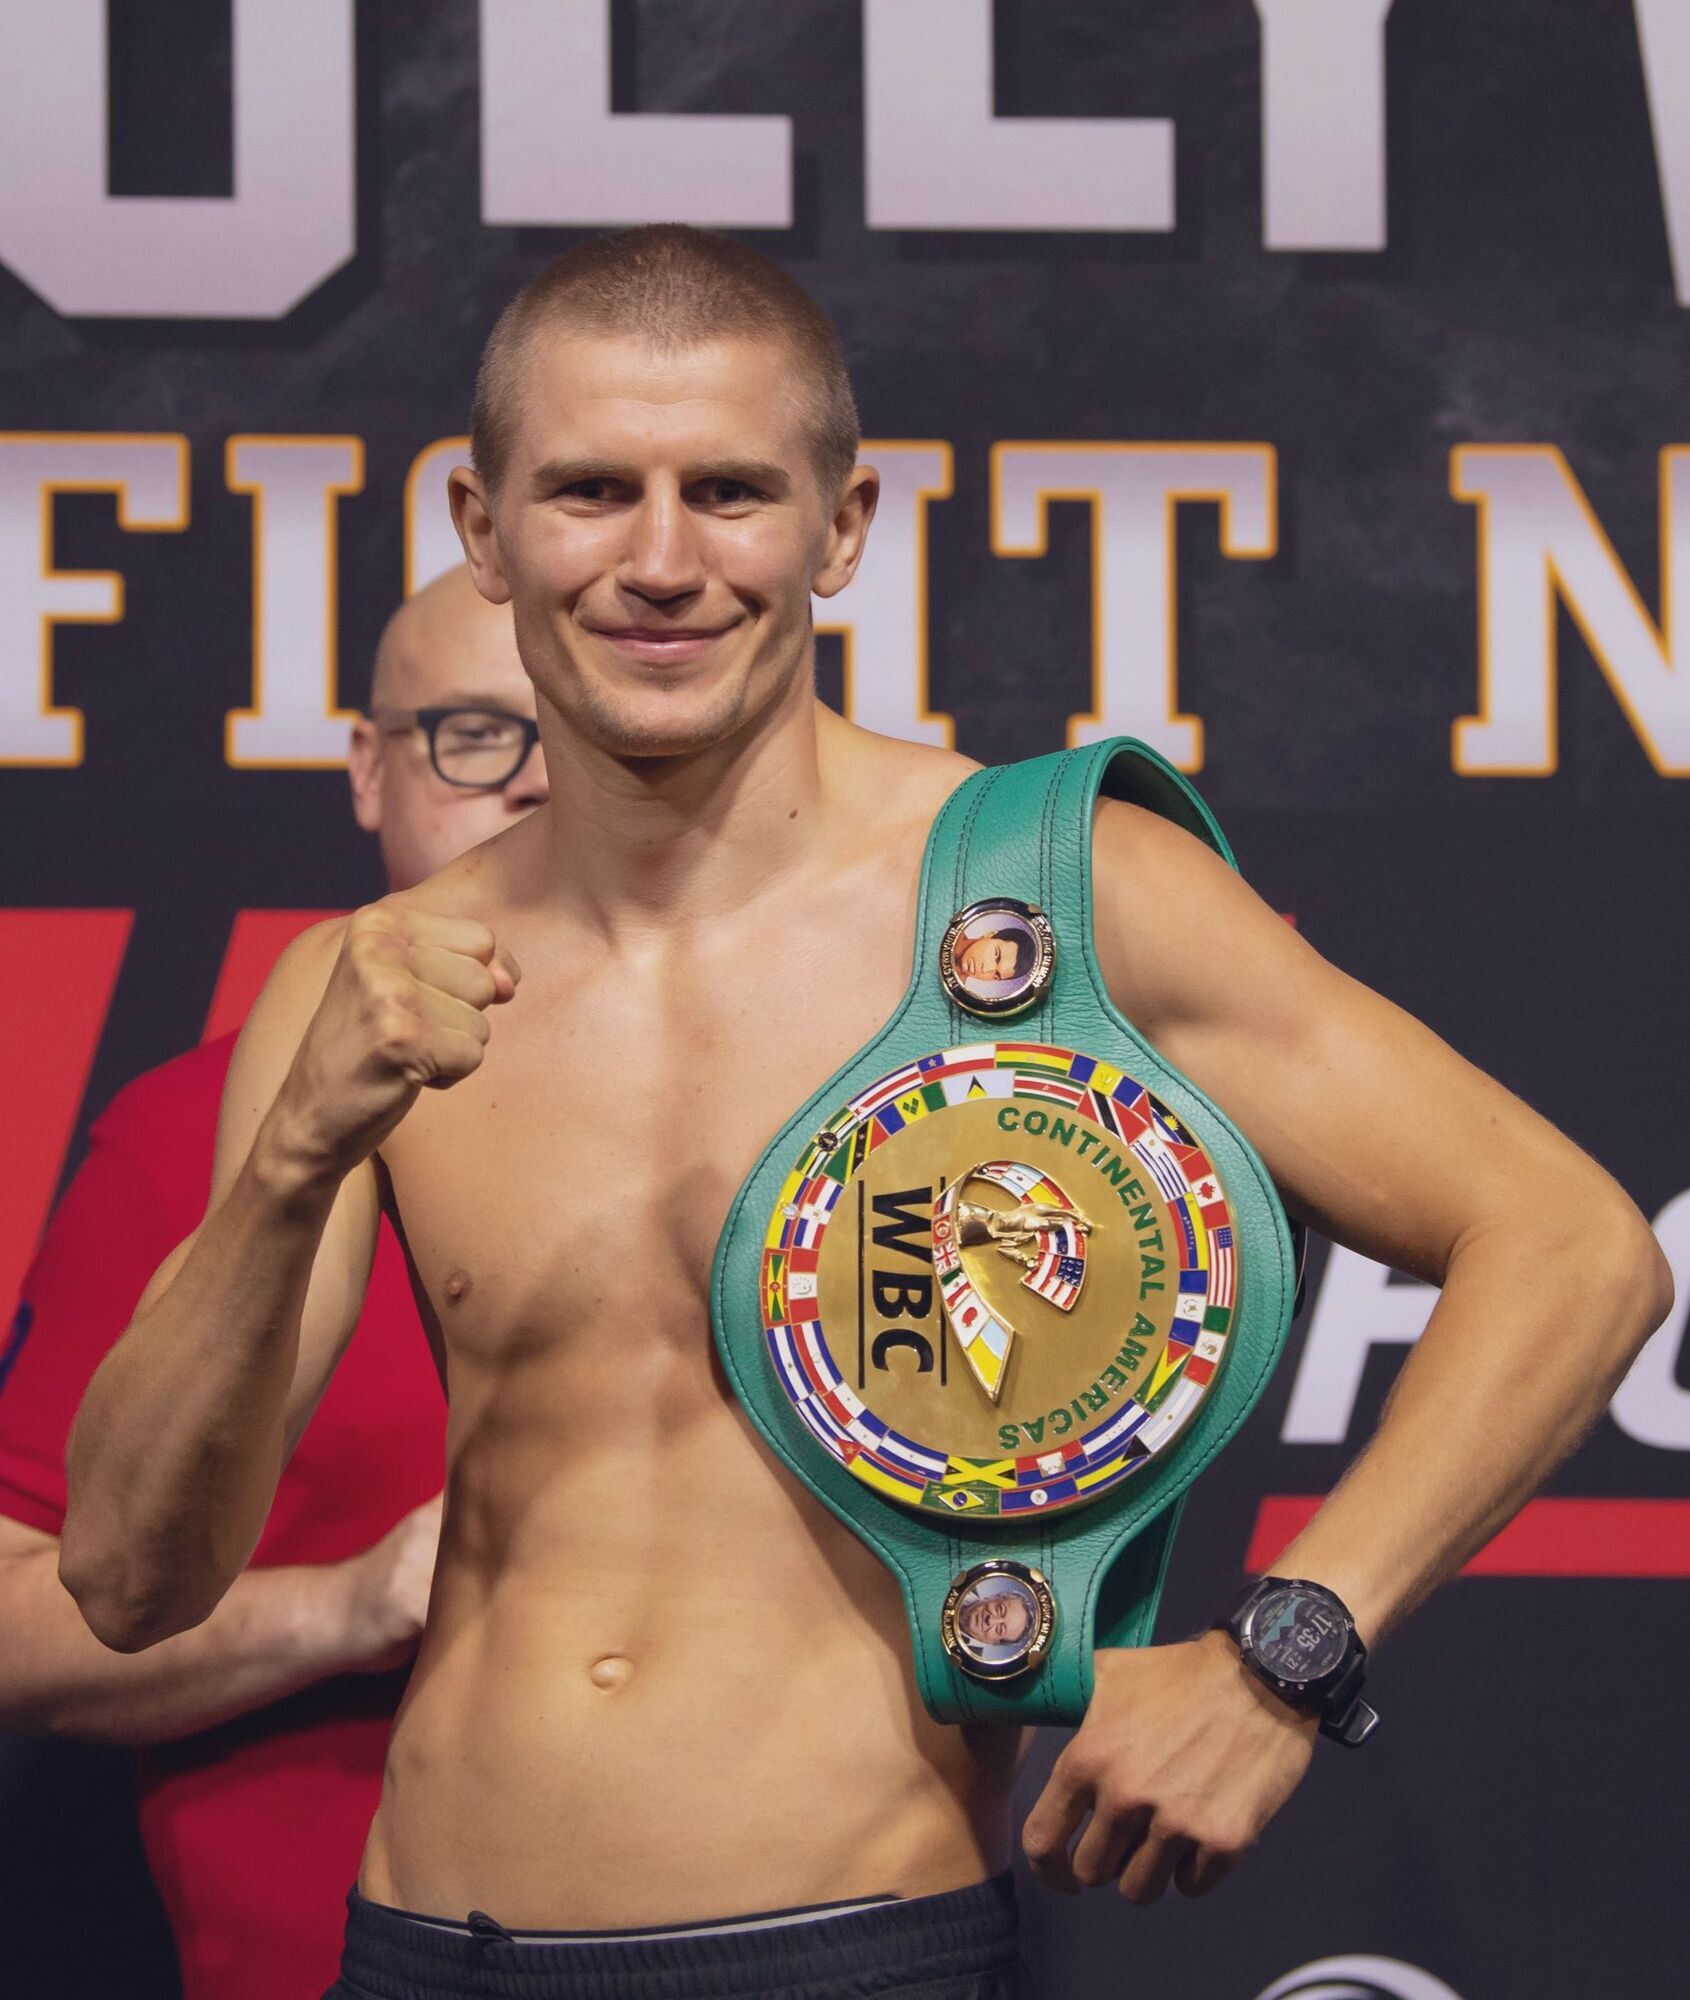 Famous Ukrainian boxer won the championship fight by knockout in the 1st round. Video